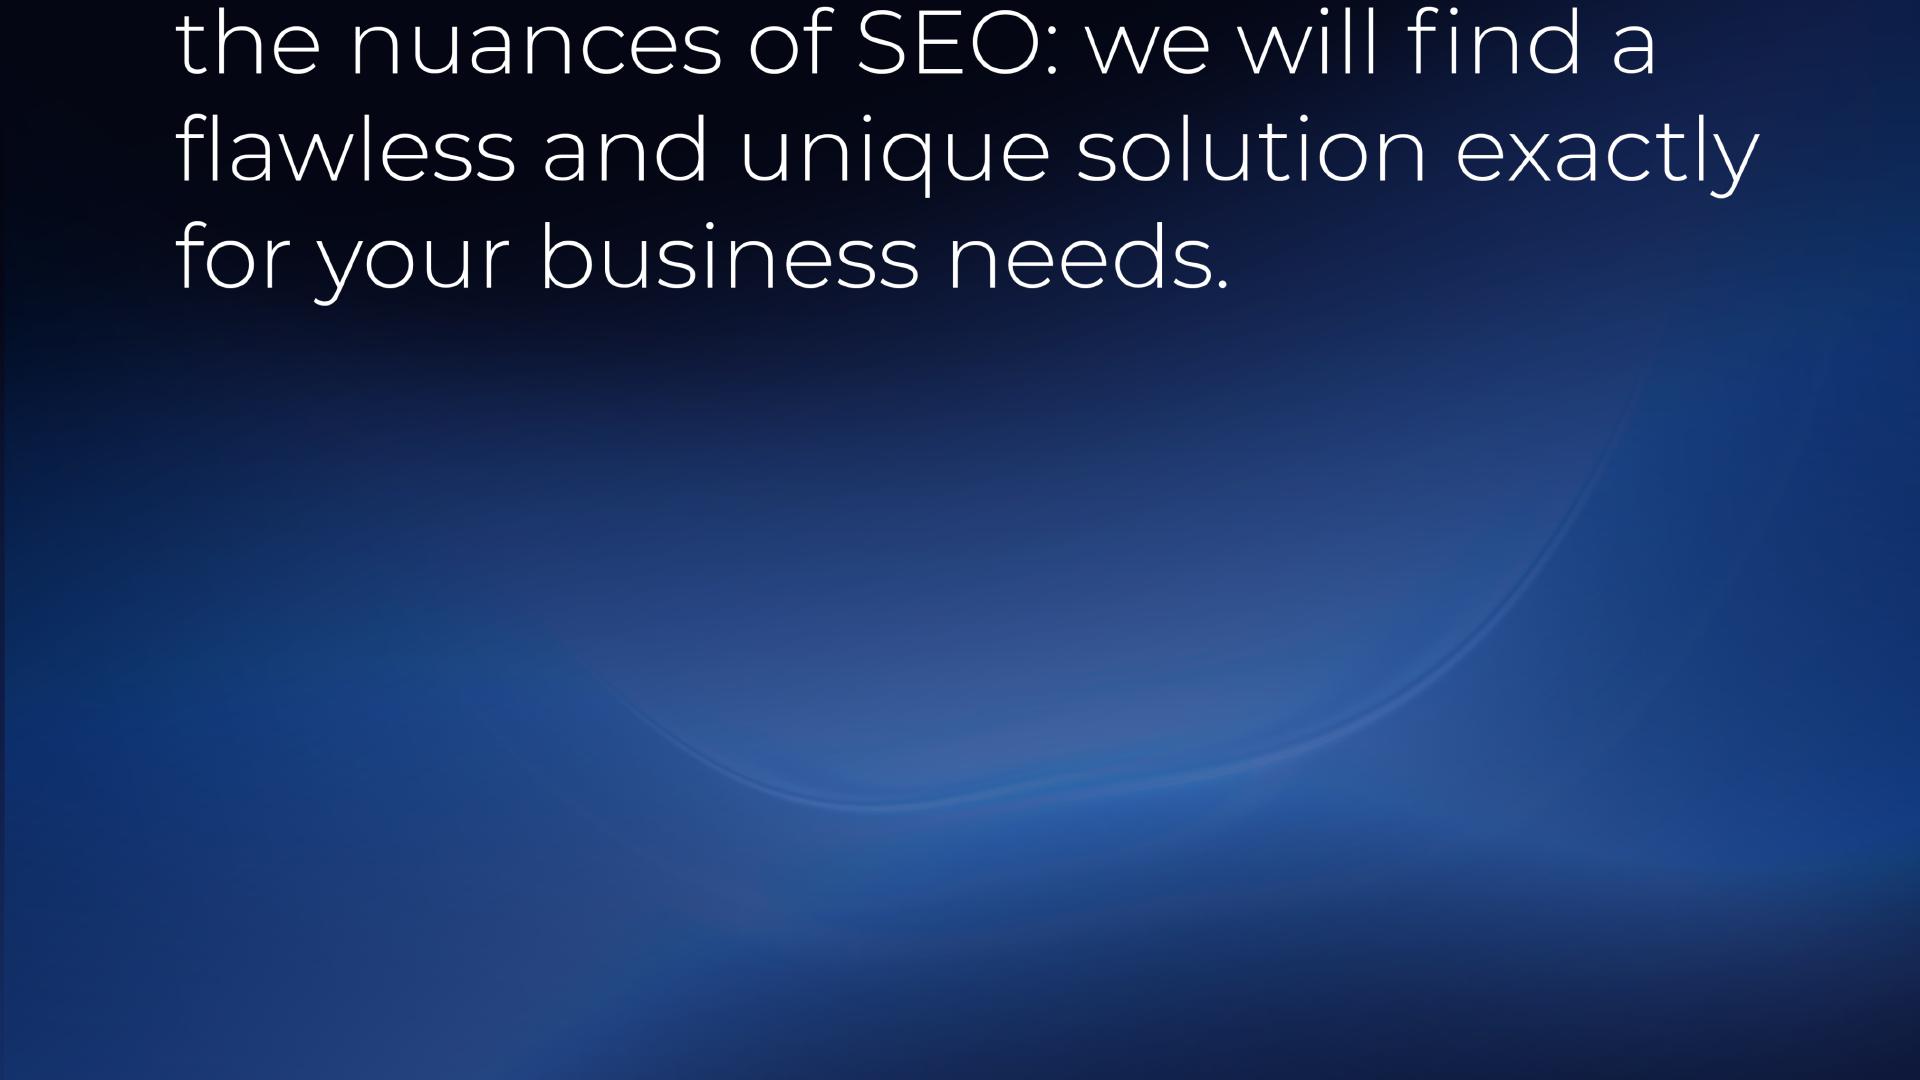 the nuances of SEO: we will find a flawless and unique solution exactly for your business needs.